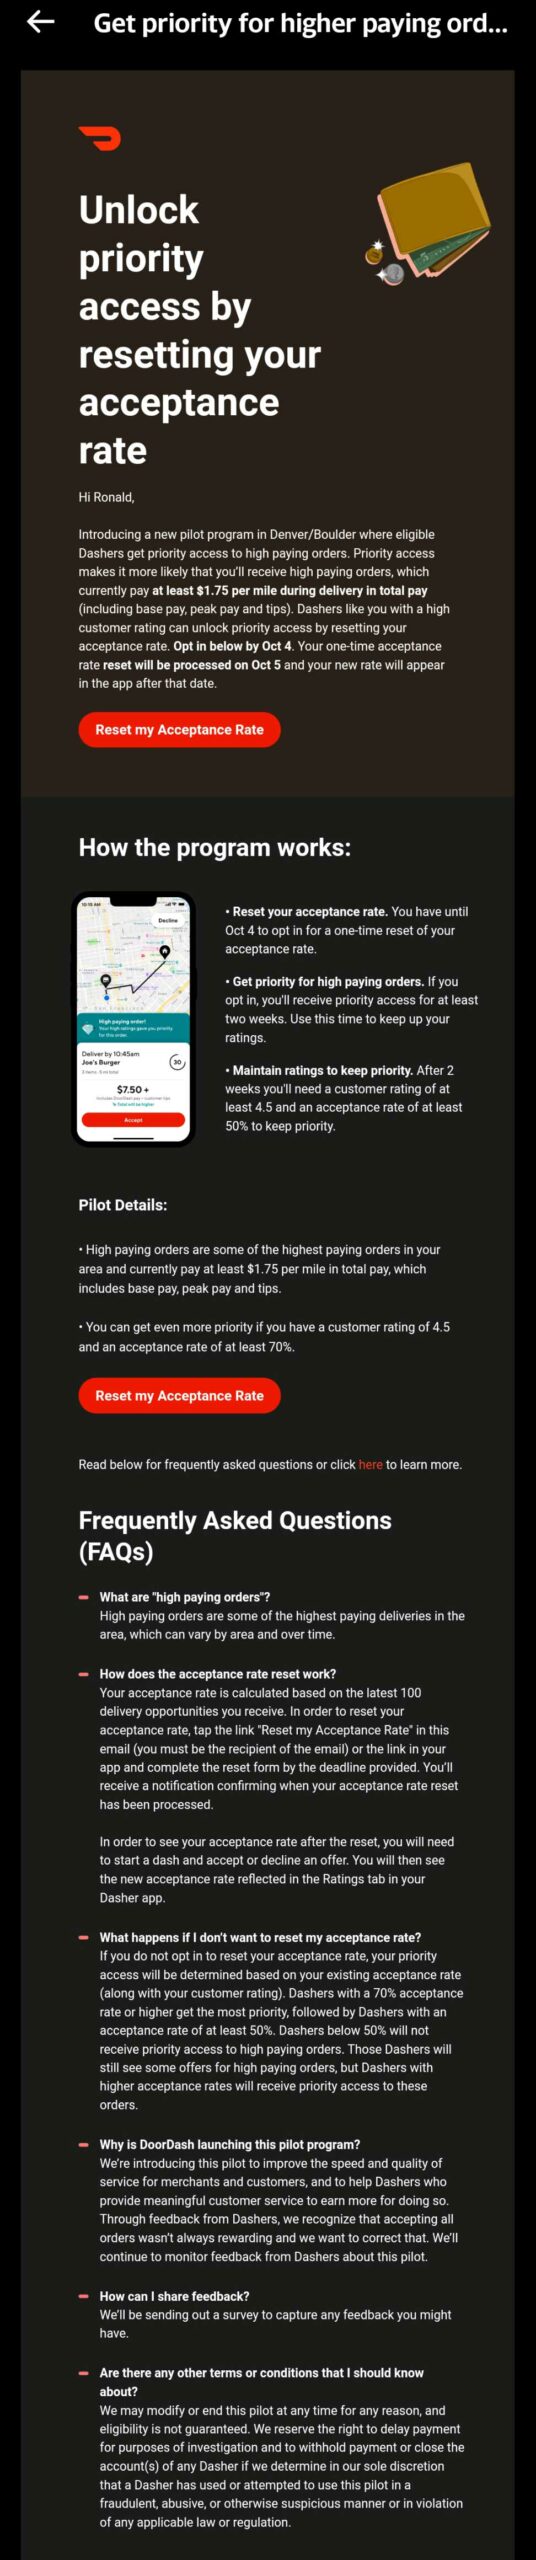 Screenshot of the entire email from Doordash promising priority for high paying orders to Dashers with a 50% acceptance rate or higher.